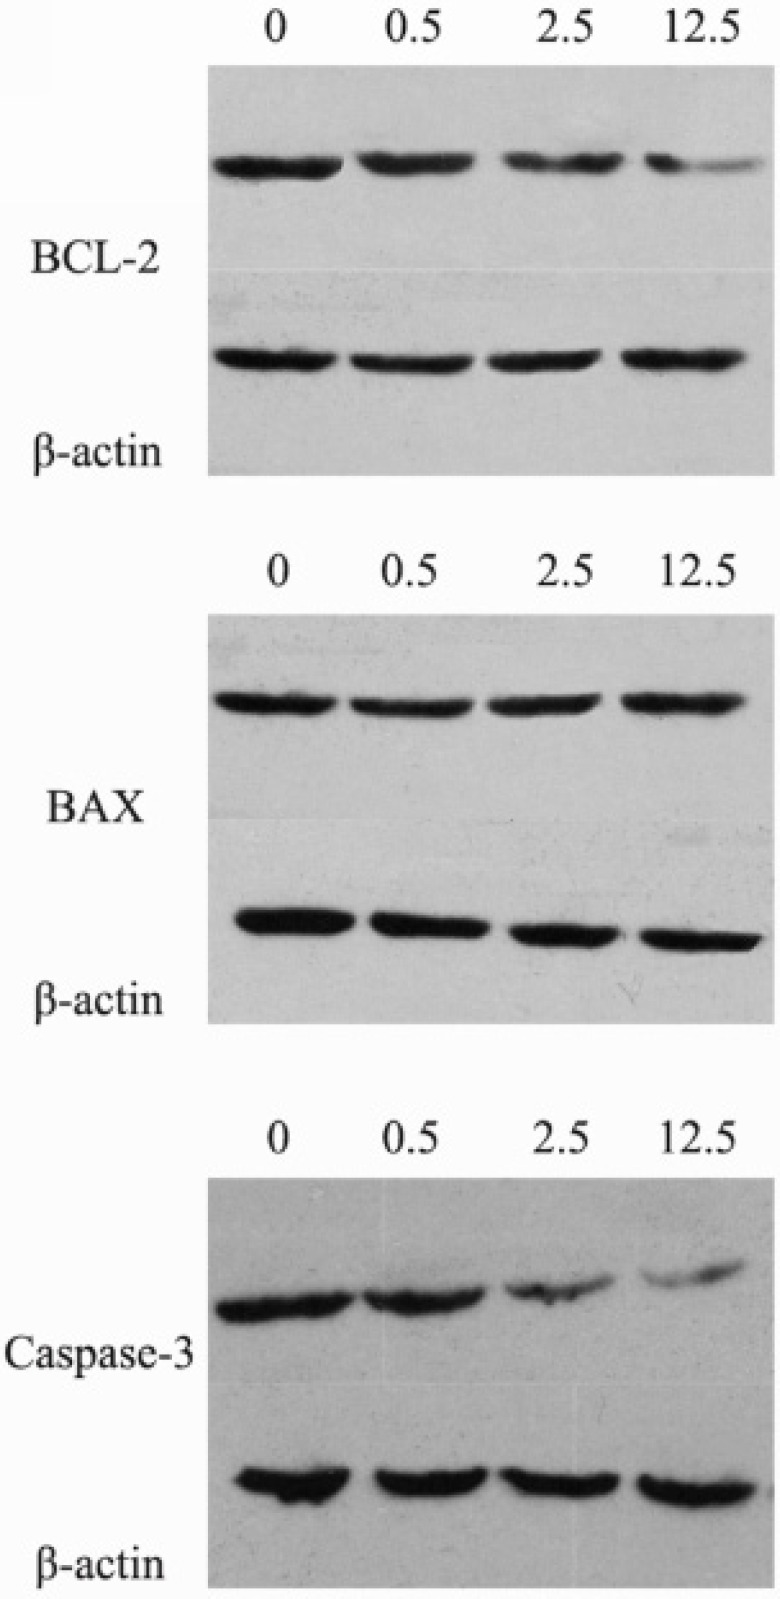 The protein expression levels of BCL-2, BAX and caspase-3 after the treatment of luteolin (0, 0.5, 2.5, 12.5 μg/mL, respectively) for 24 hours. 0: control group; 0.5: Luteolin (0.5 μg/mL); 2.5: Luteolin (2.5 μg/mL); 12.5: Luteolin (12.5 μg/mL)